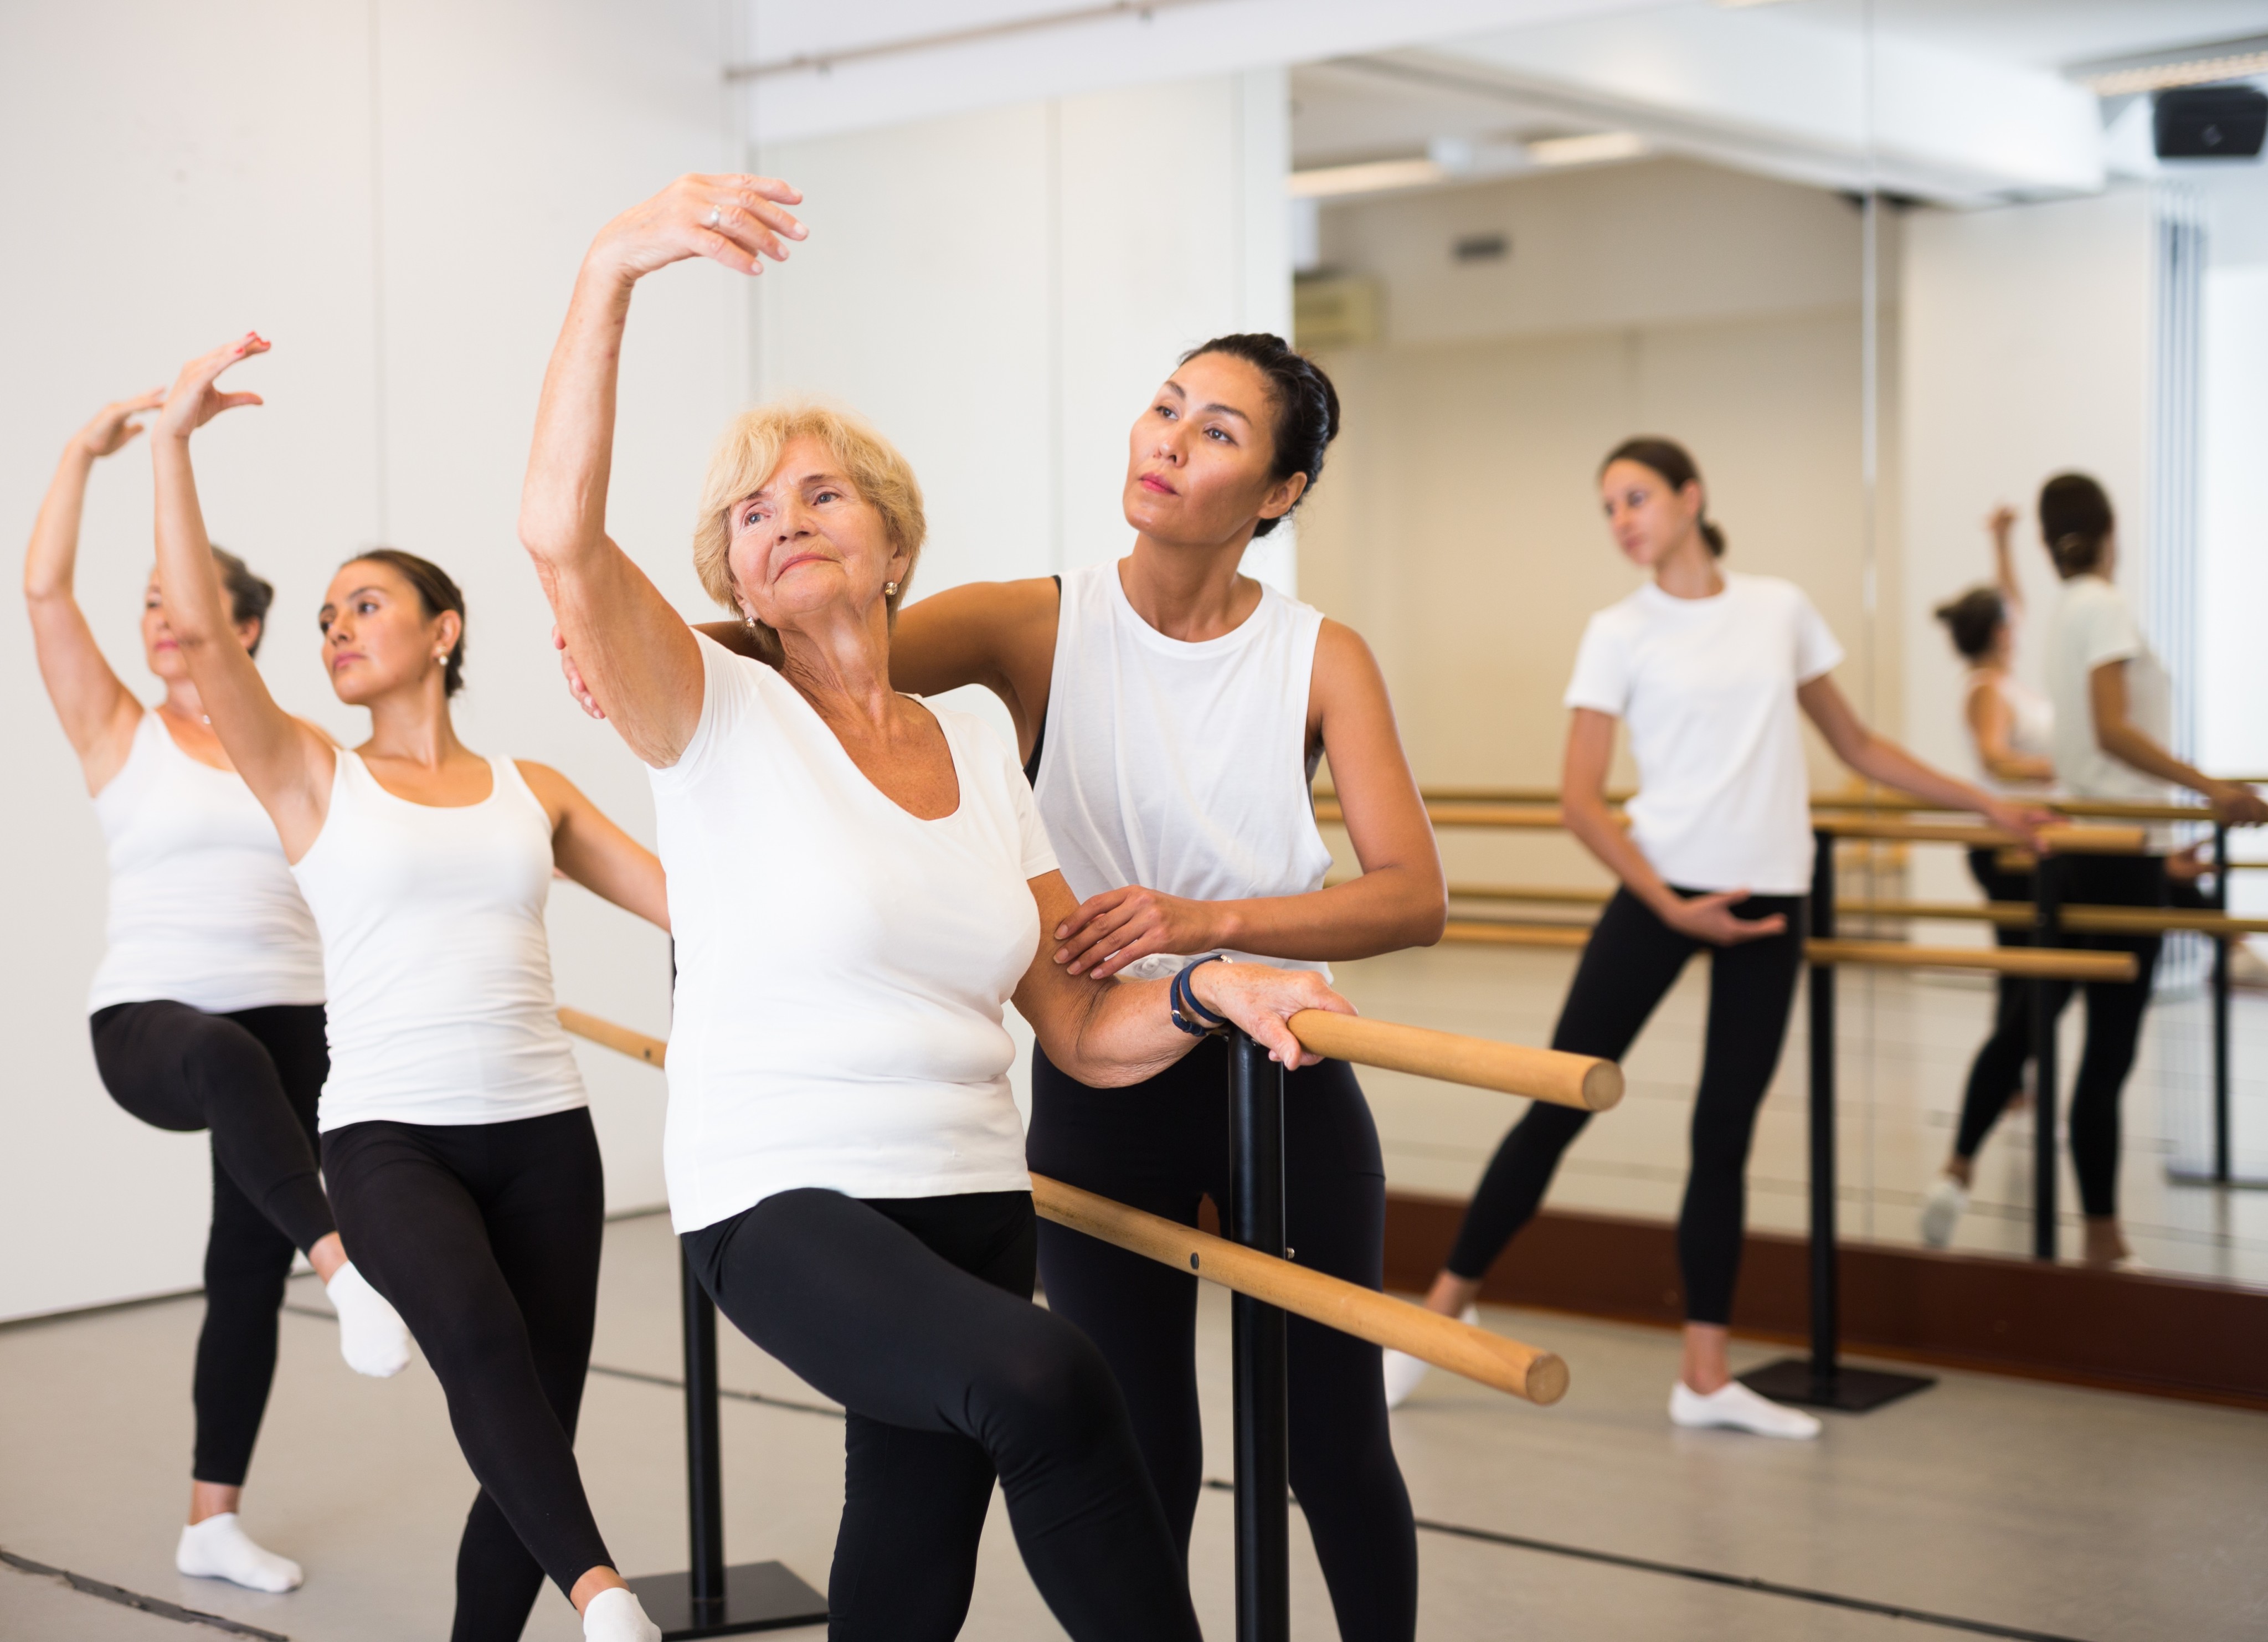 Lifestyle tips for avoiding or delaying the onset of Alzheimer’s disease, the most common form of dementia, include staying active and socially engaged. Photo: Shutterstock